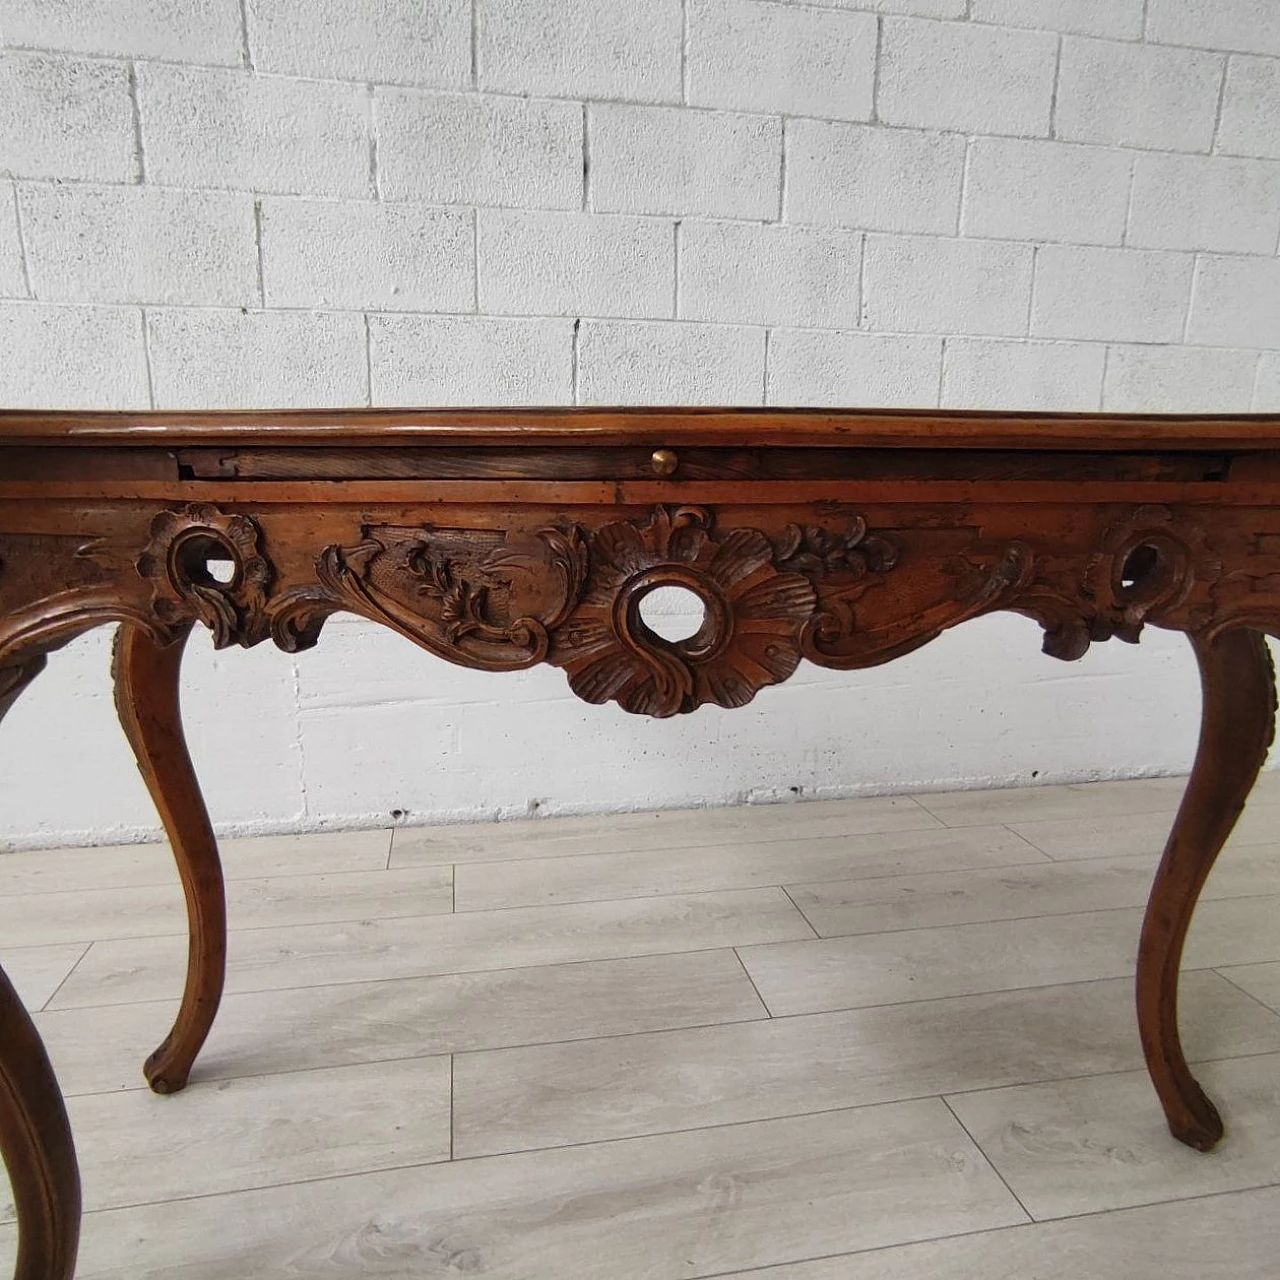 Walnut console with legs decorated with floral motifs, 18th century 5